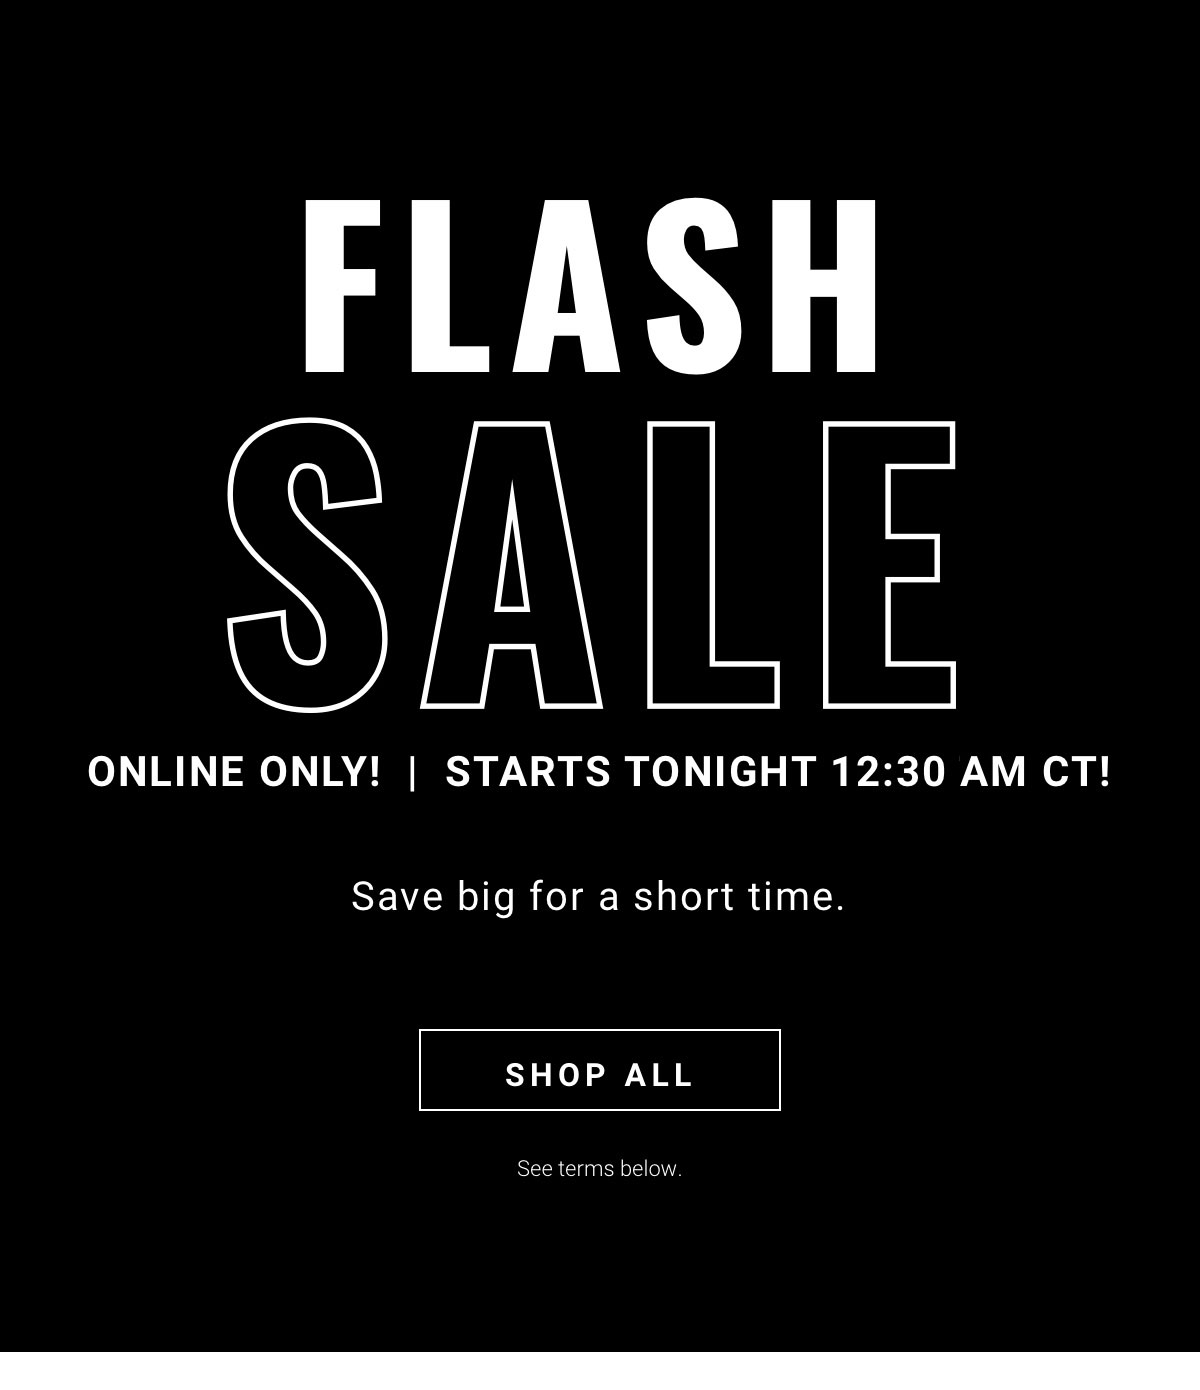 You have TWO DAYS to save during our Online Only Flash Sale